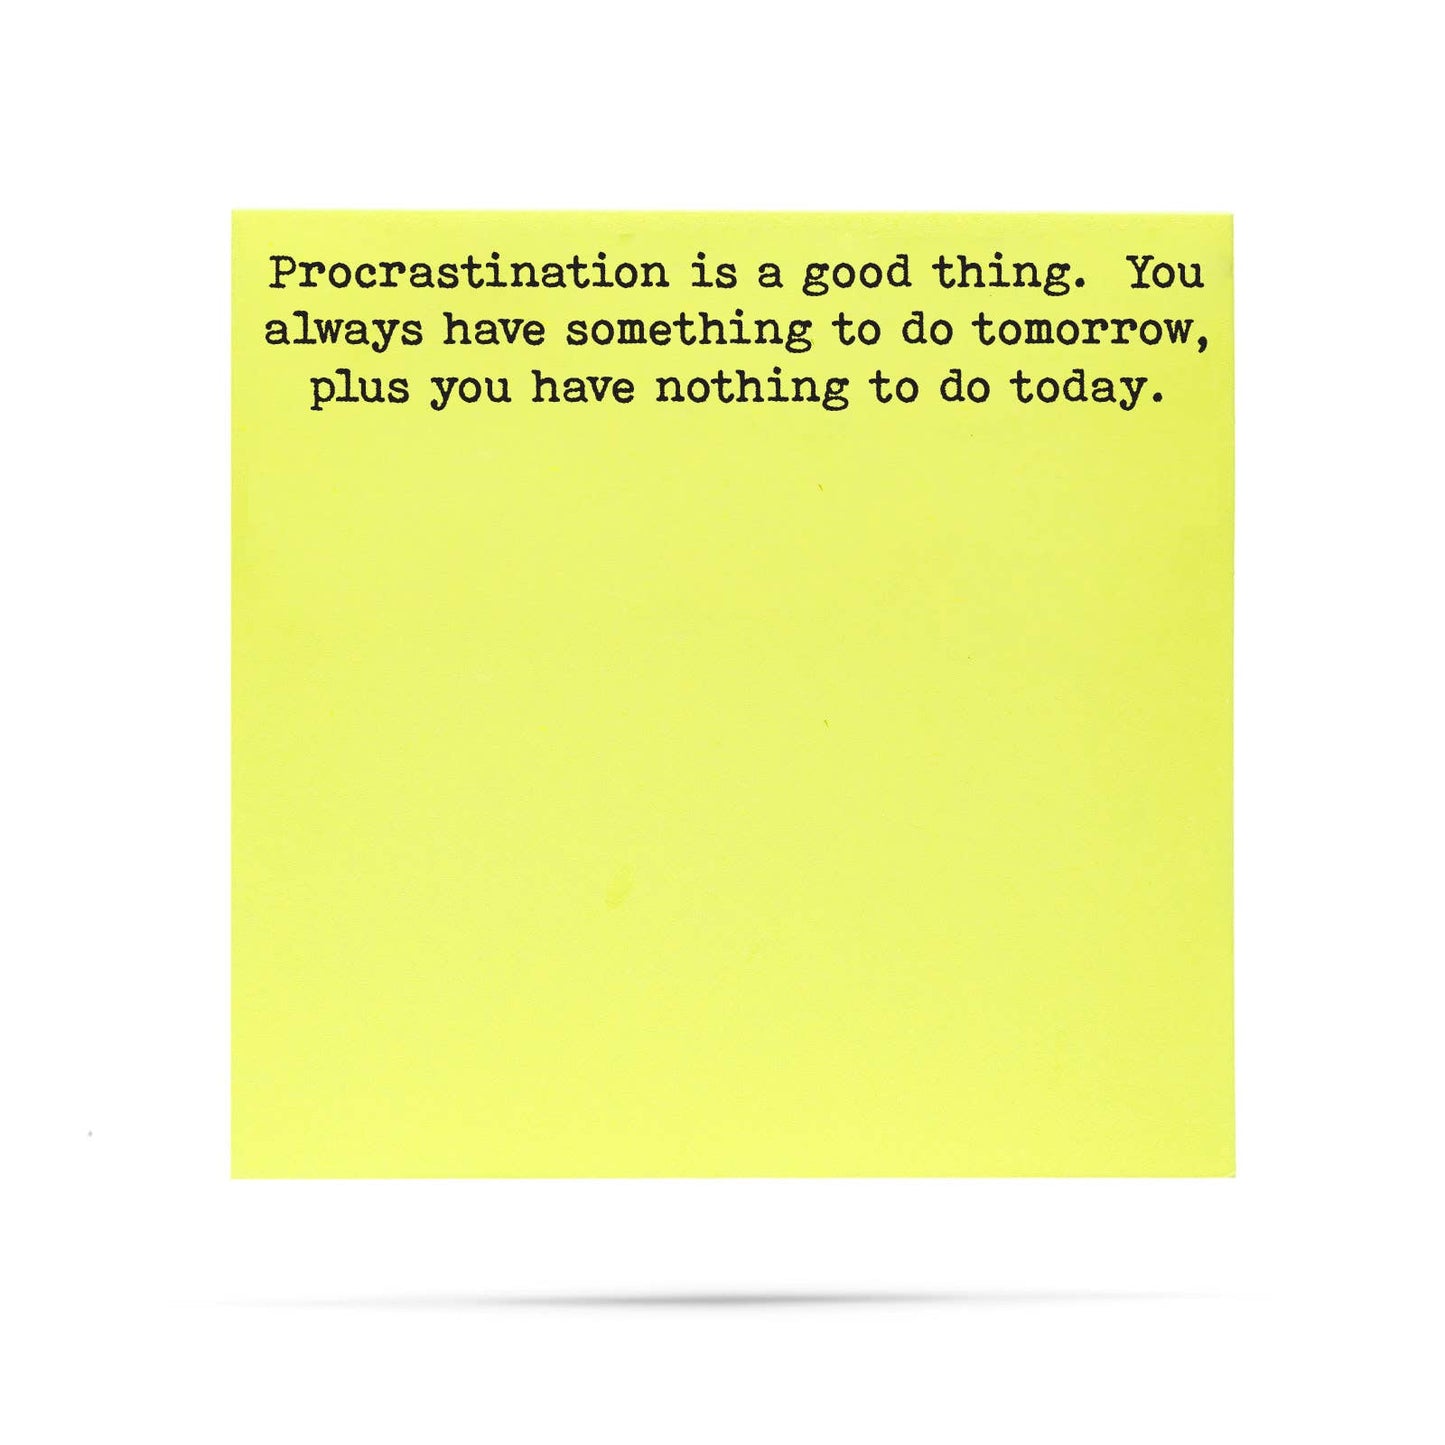 Procrastination is a good thing |  sticky notes with sayings